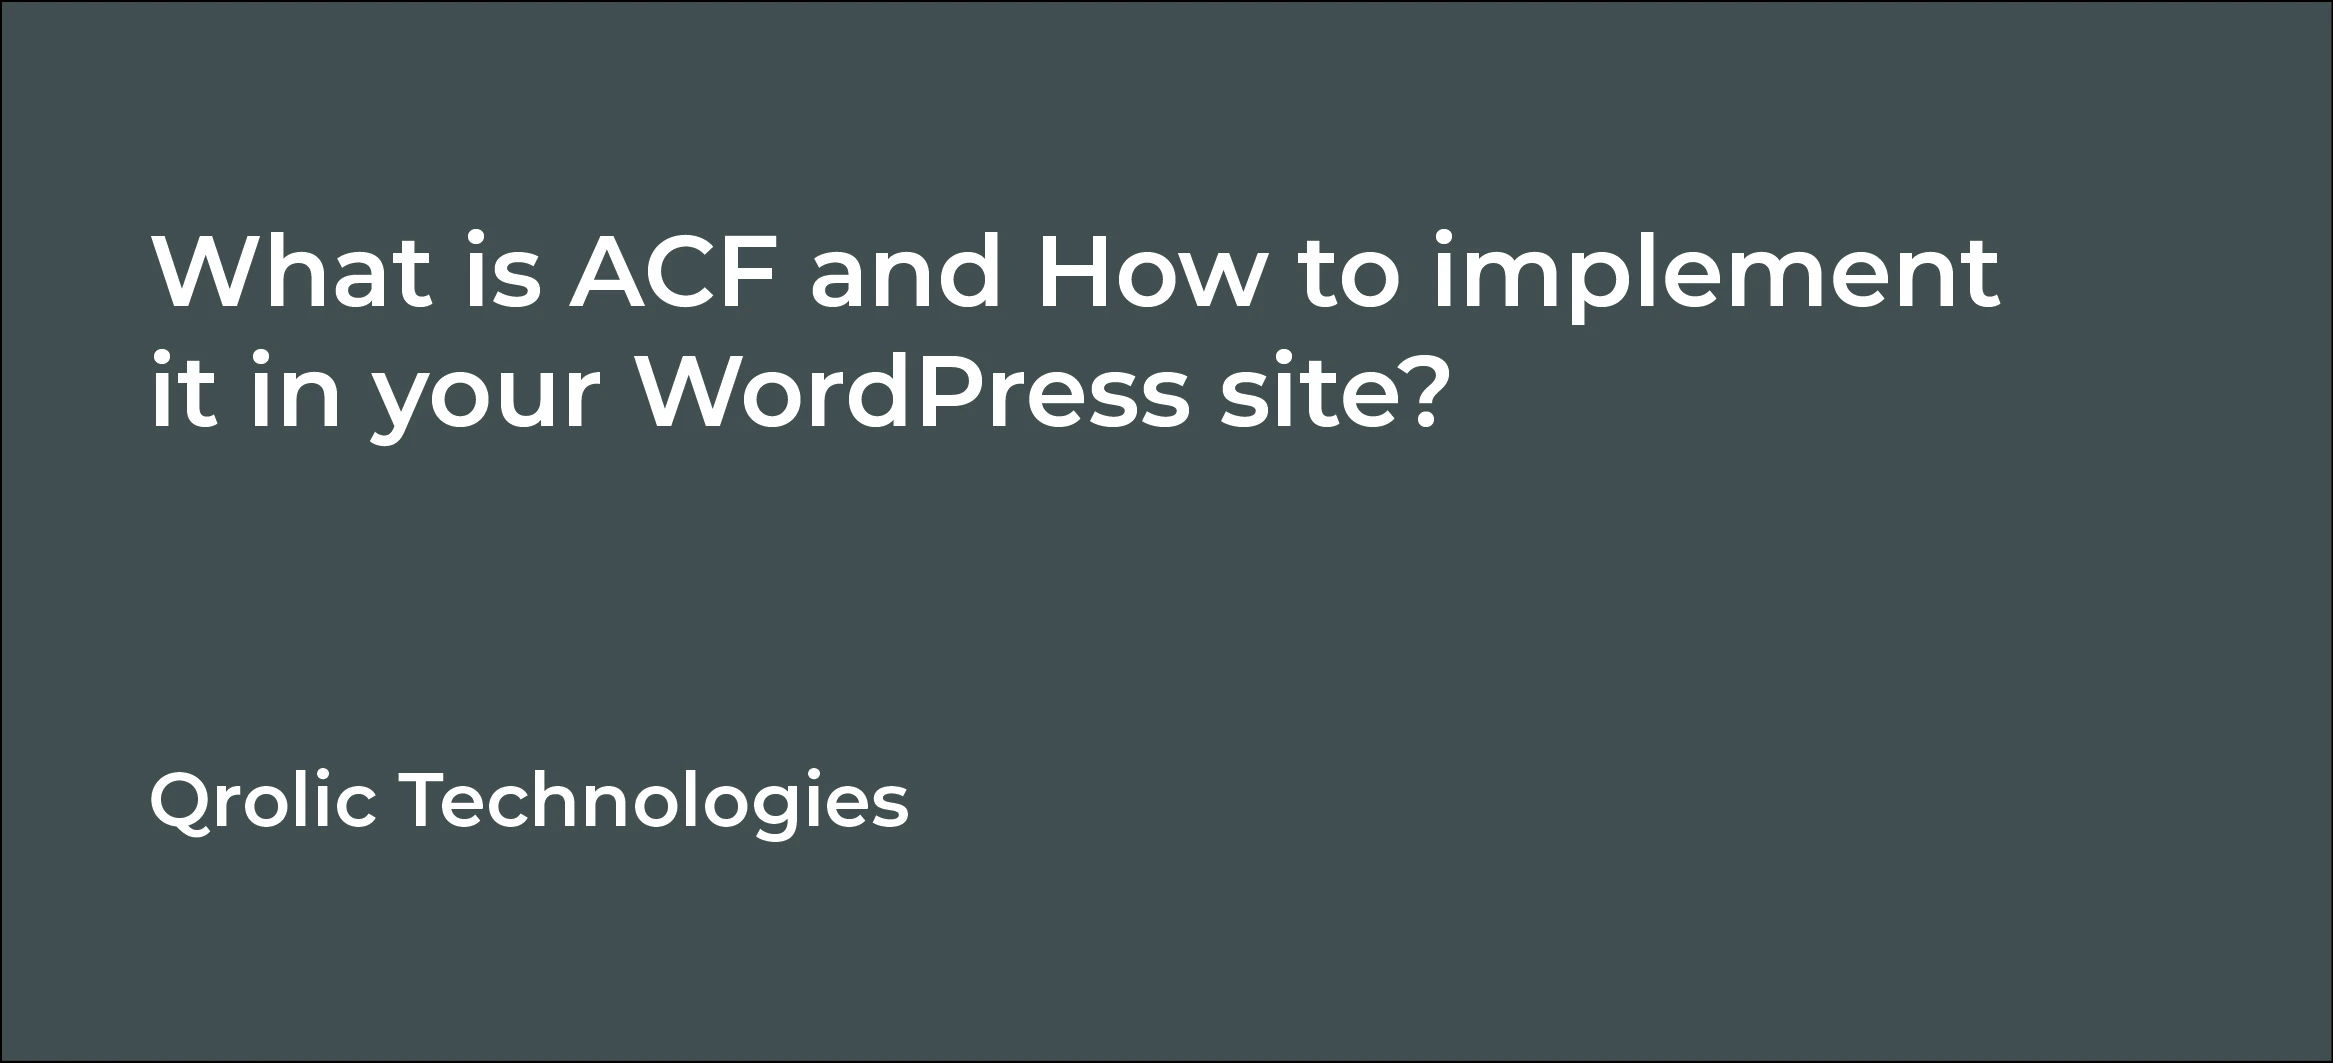 what is ACF and how to implement it in your wordpress site